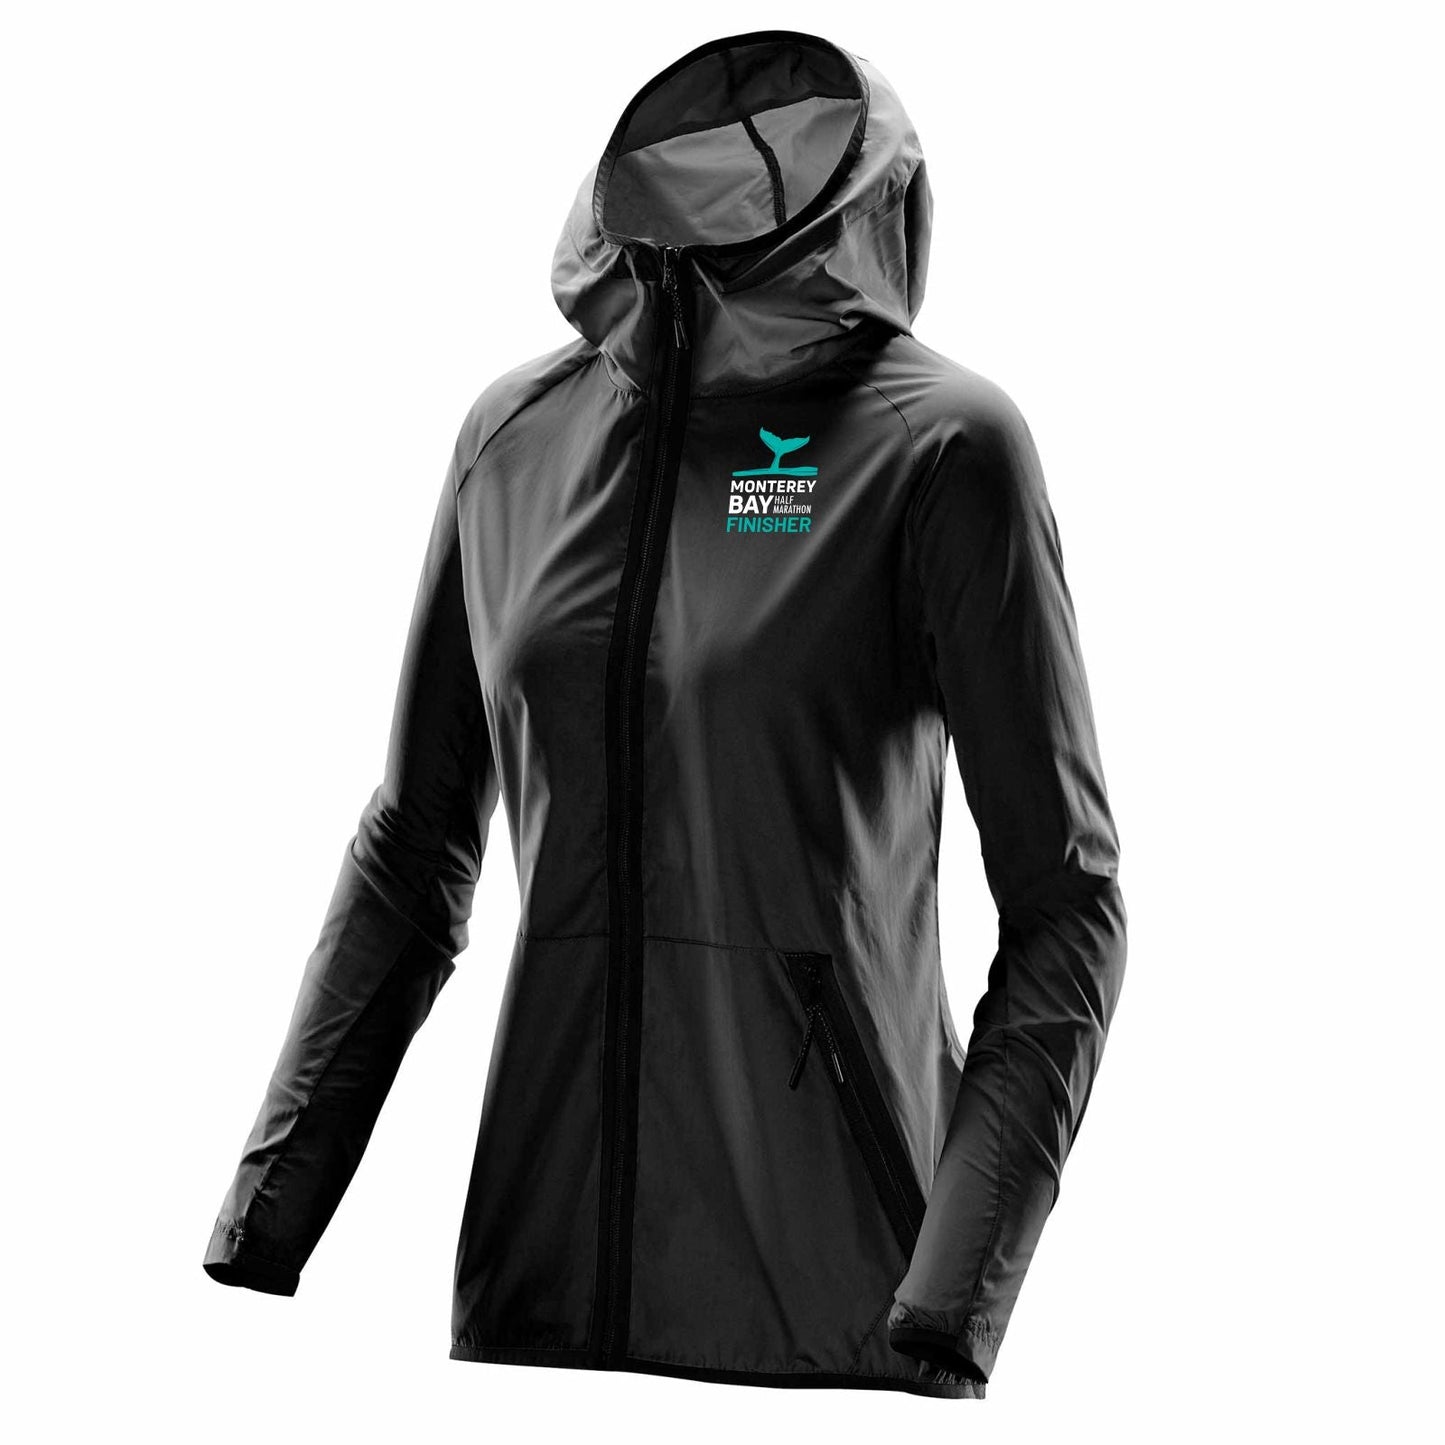 MBH Women's DWR Zip Hooded Shell -Black- 2022 Finisher Embroidery